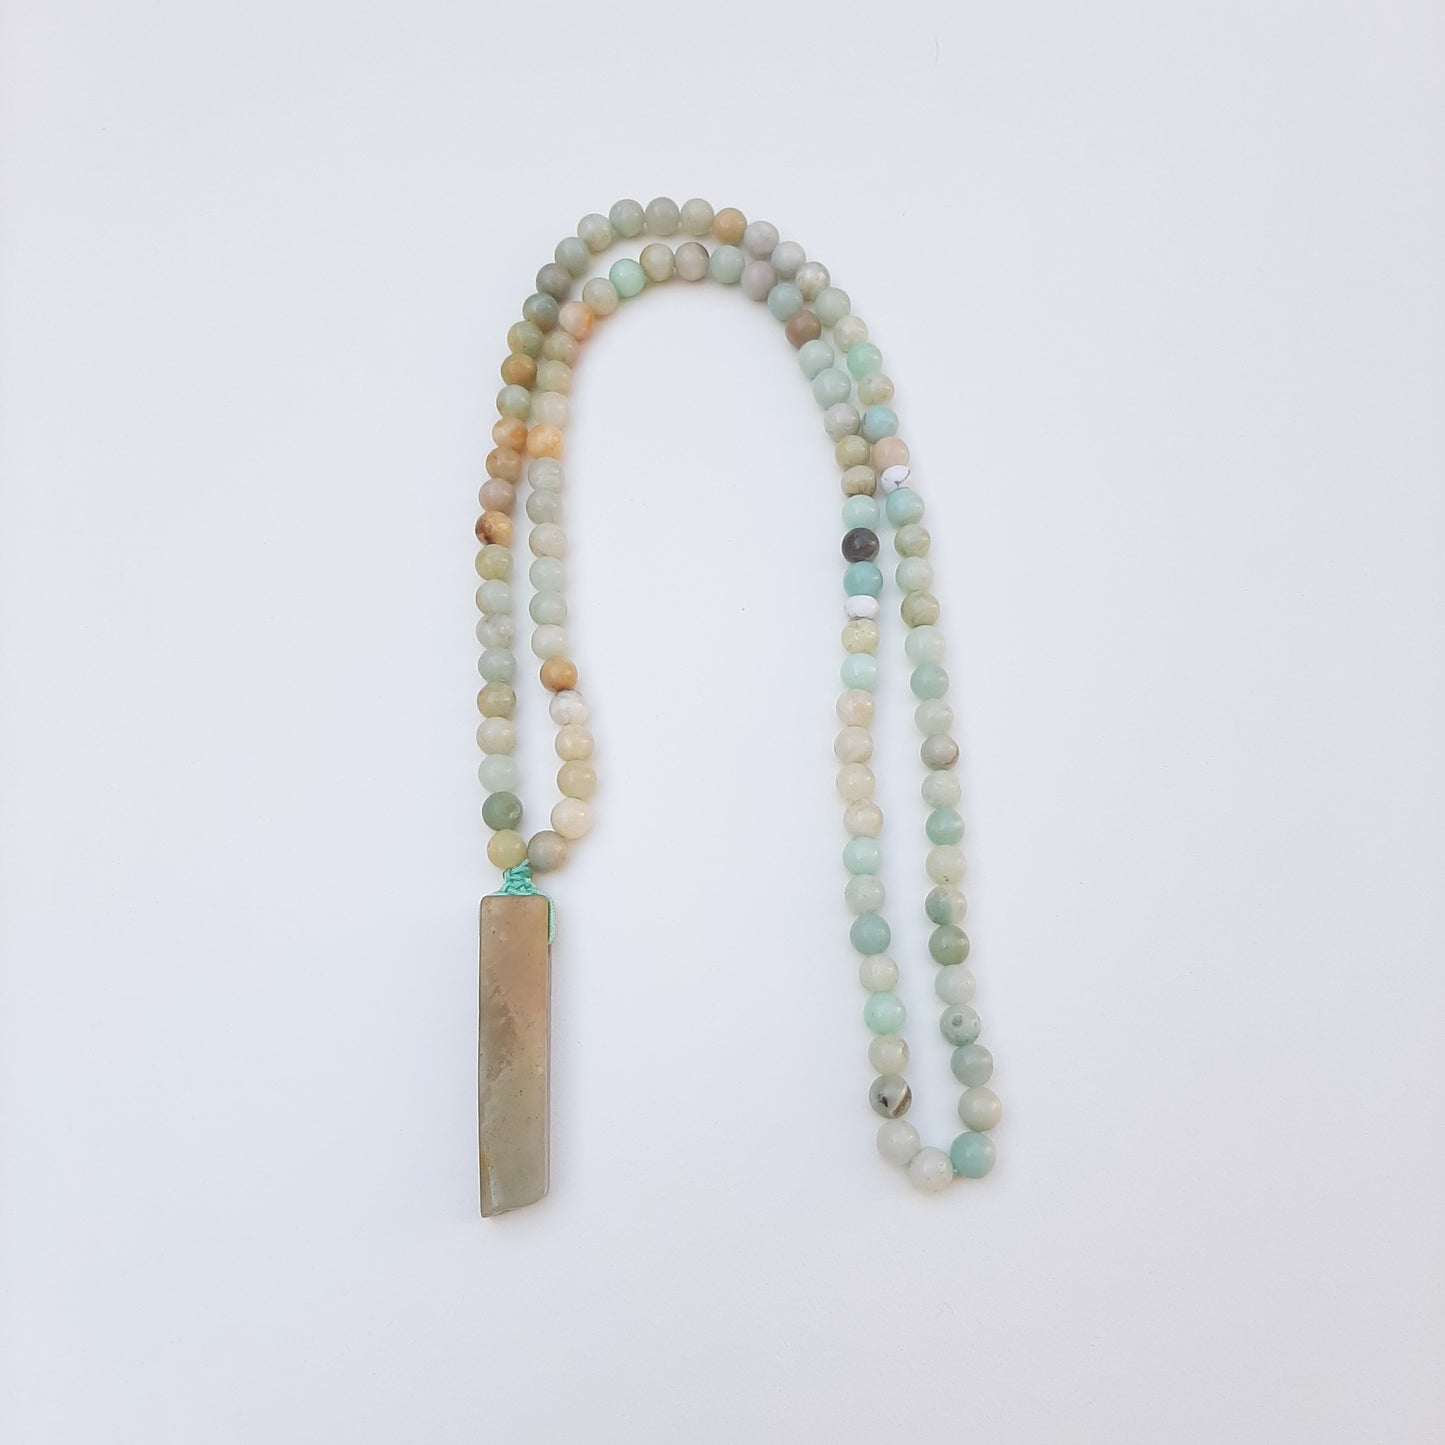 Mixed amazonite beads and stone.  Packaged in a luxurious pouch and a gift box.  99 beads